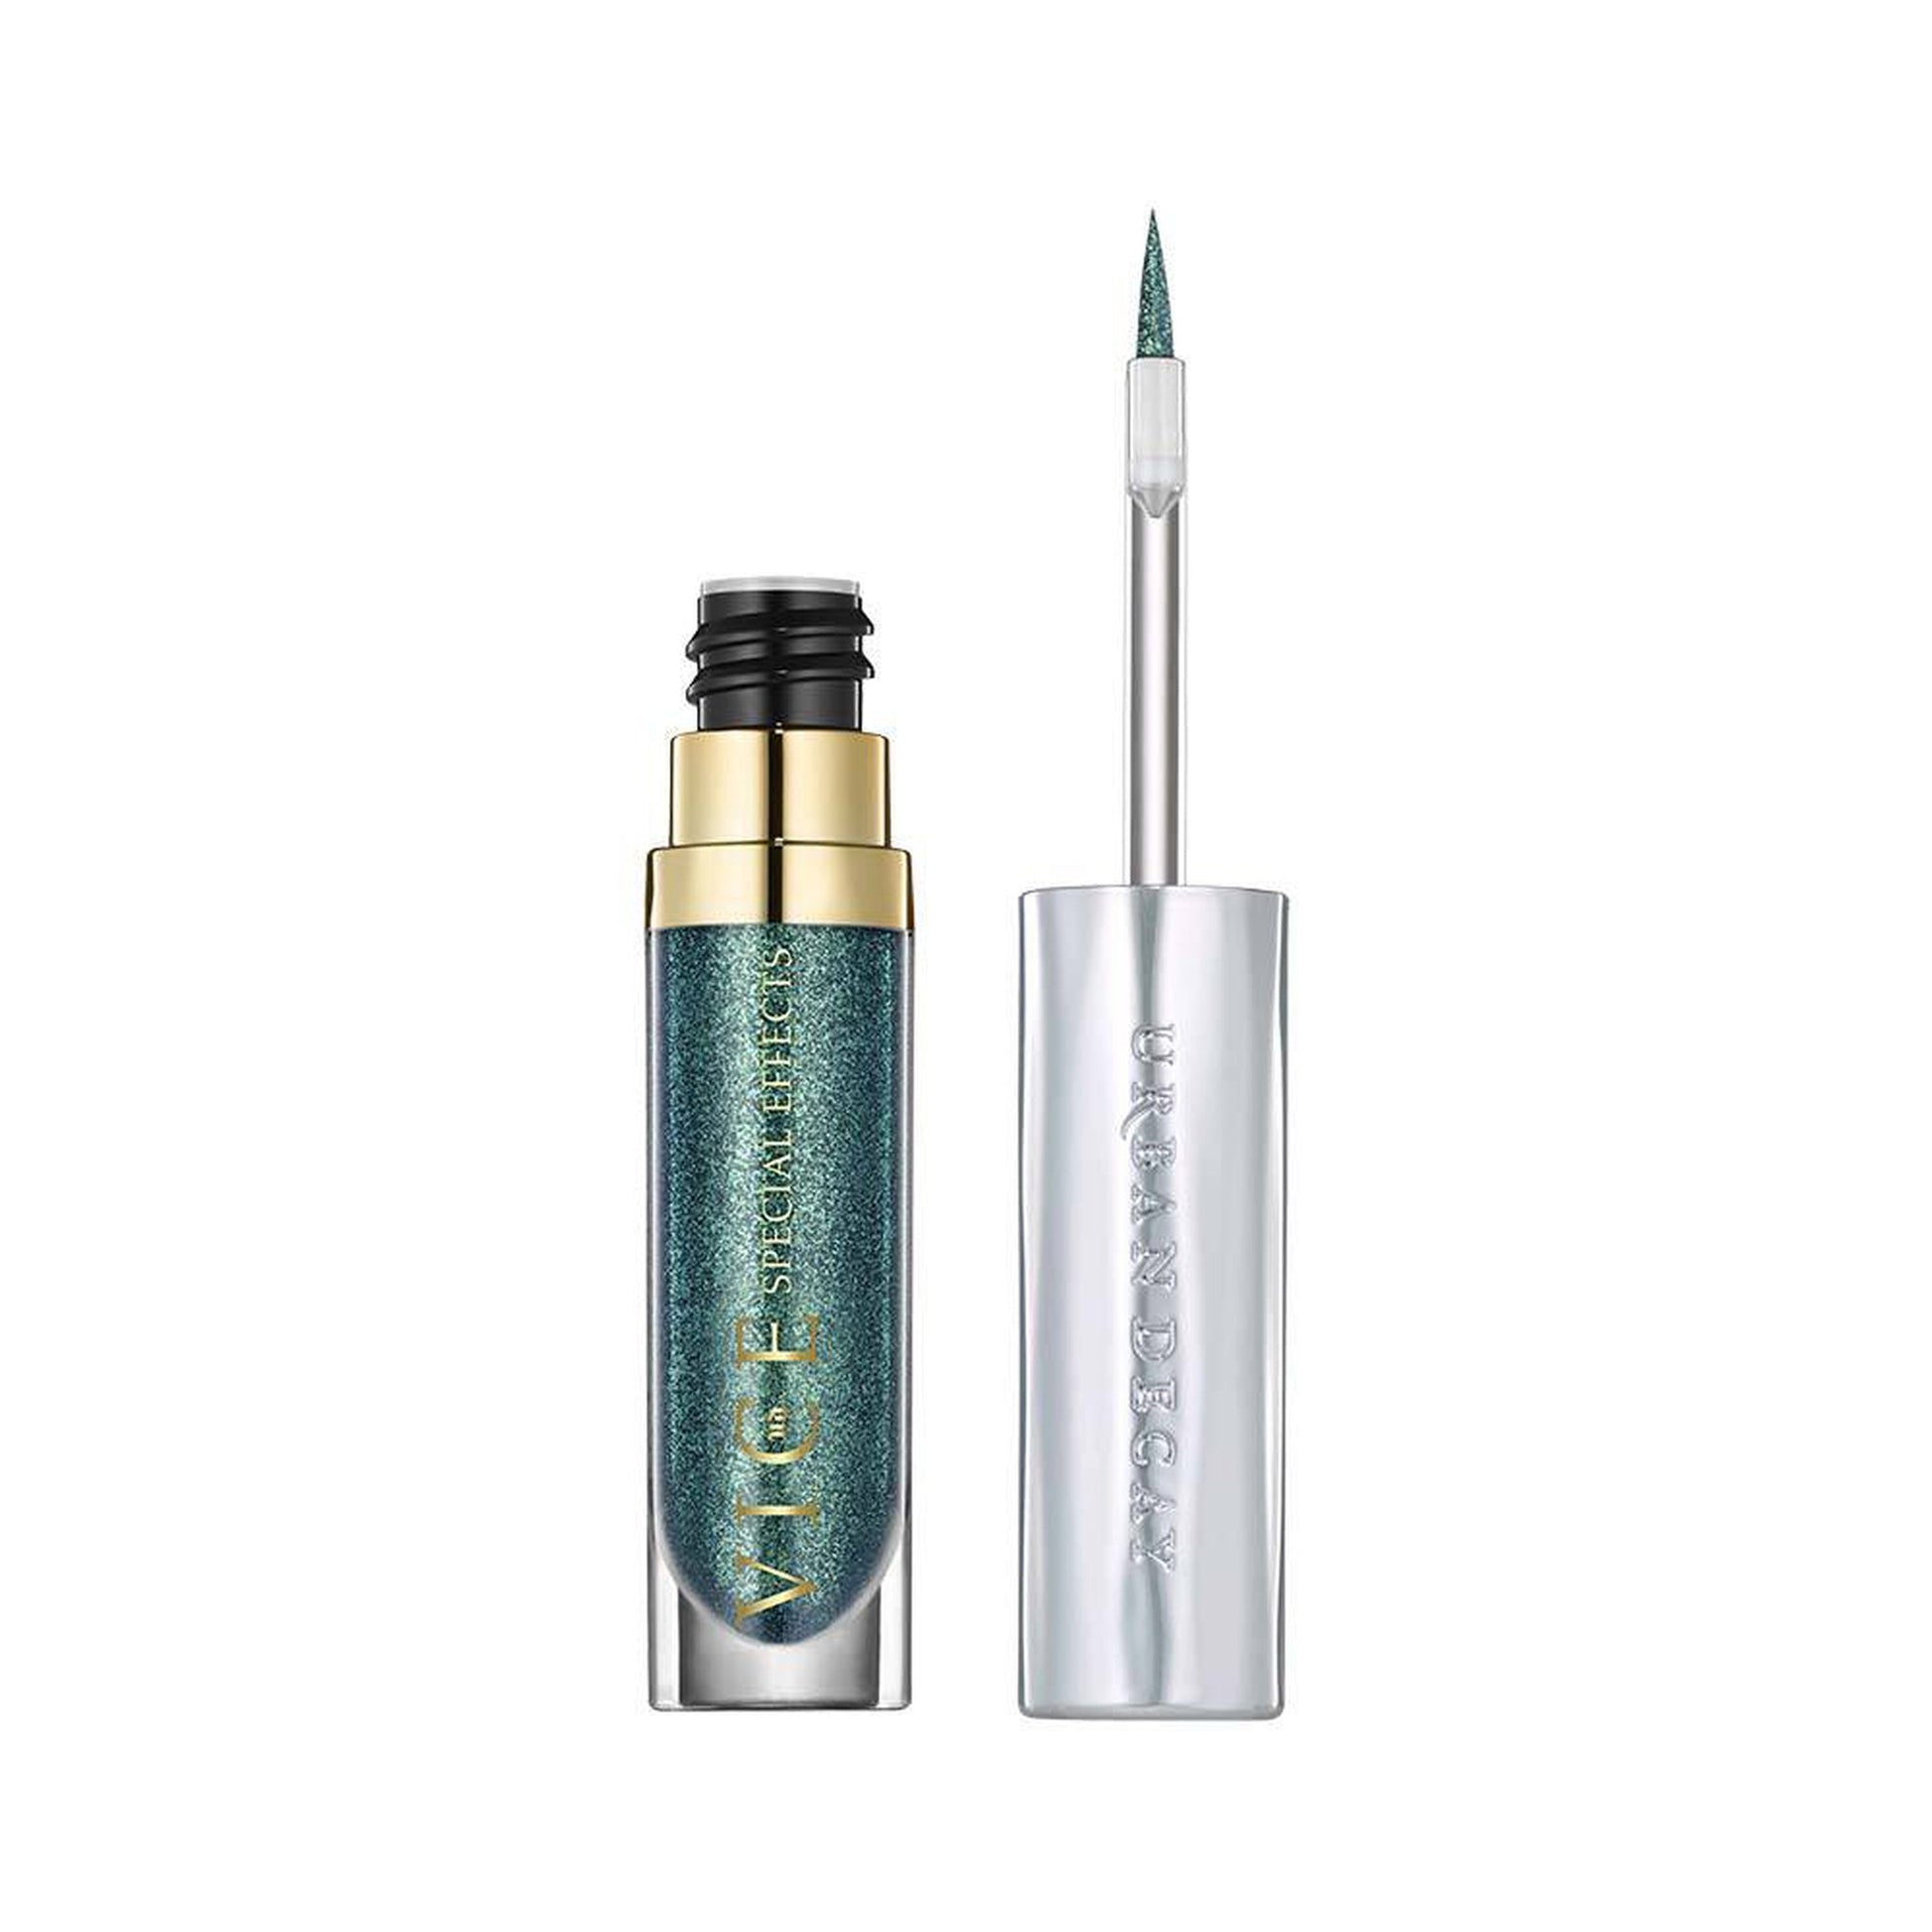 Urban Decay VICE SPECIAL EFFECTS Long-Lasting Water-Resistant Lip Topcoat Circuit-URBAN DECAY-BeautyNmakeup.co.uk